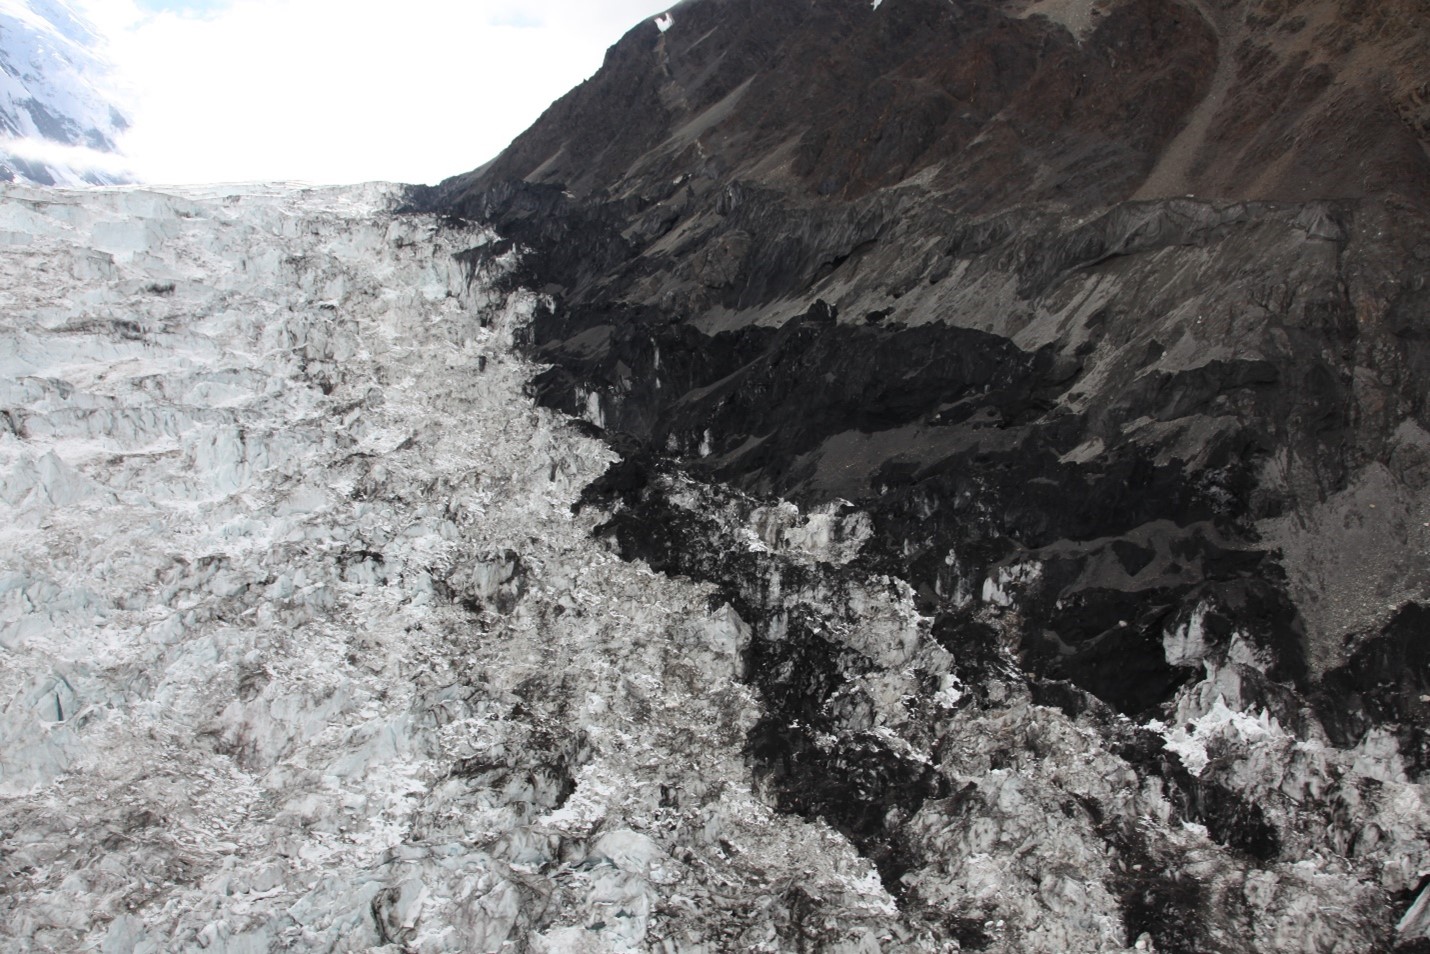 Closeup of interface between jumbled glacier icefall and the steep side ridge